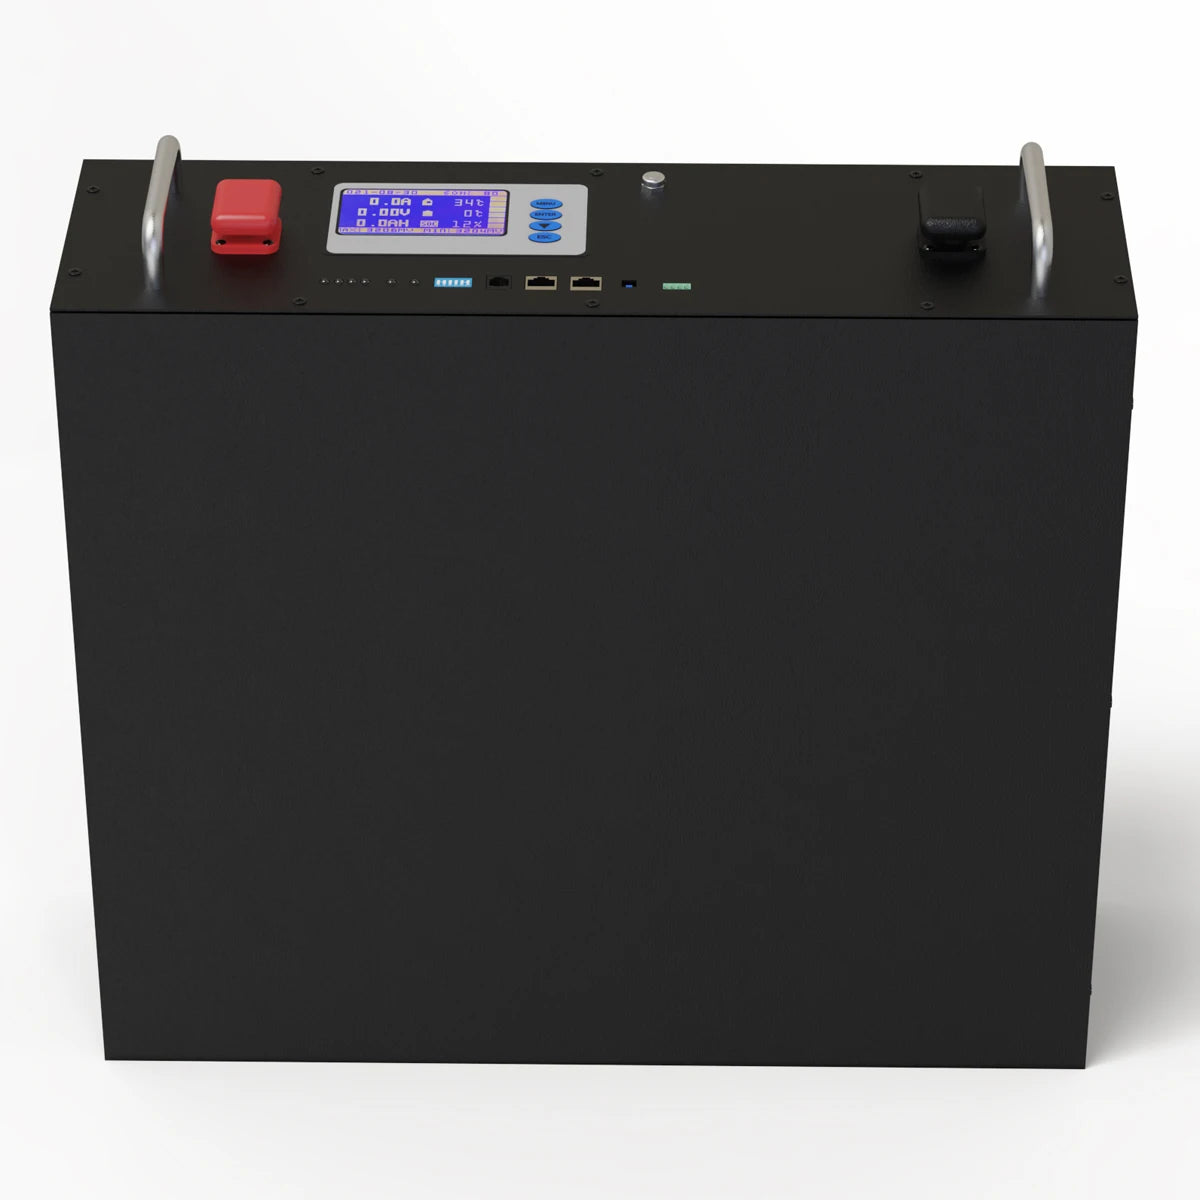 LiFePO4 48V 3KW Battery, CERRNSS Lifepo4 Battery: 60Ah, 48V, 38kg, CE certified, compatible with various inverters.